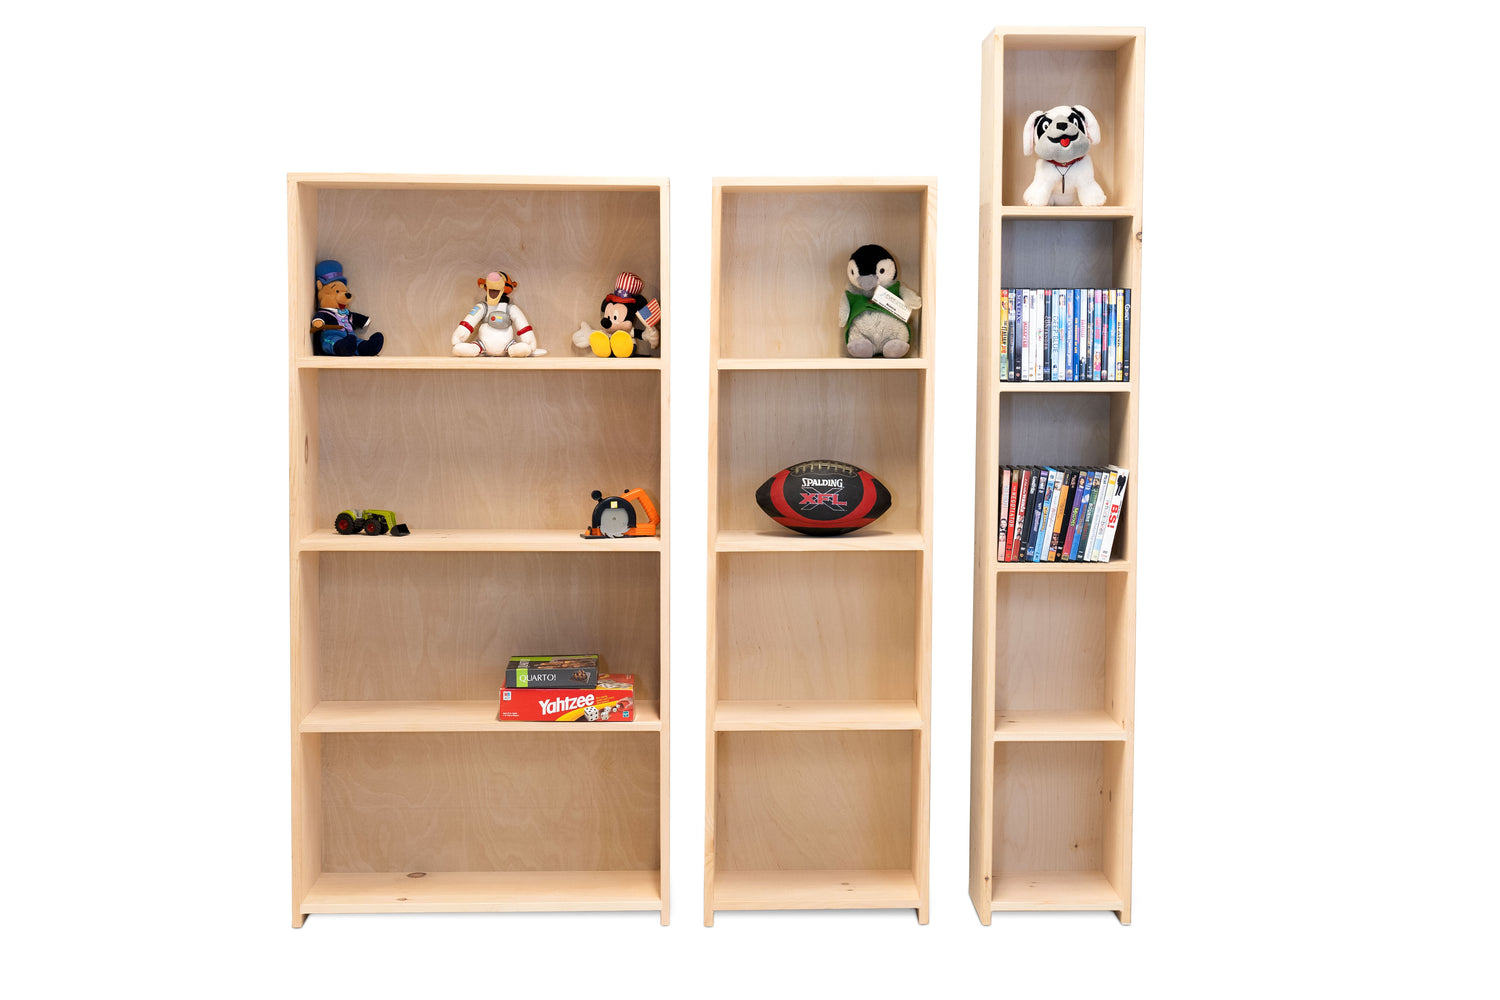 Three bookcases built in pine that are unfinished.